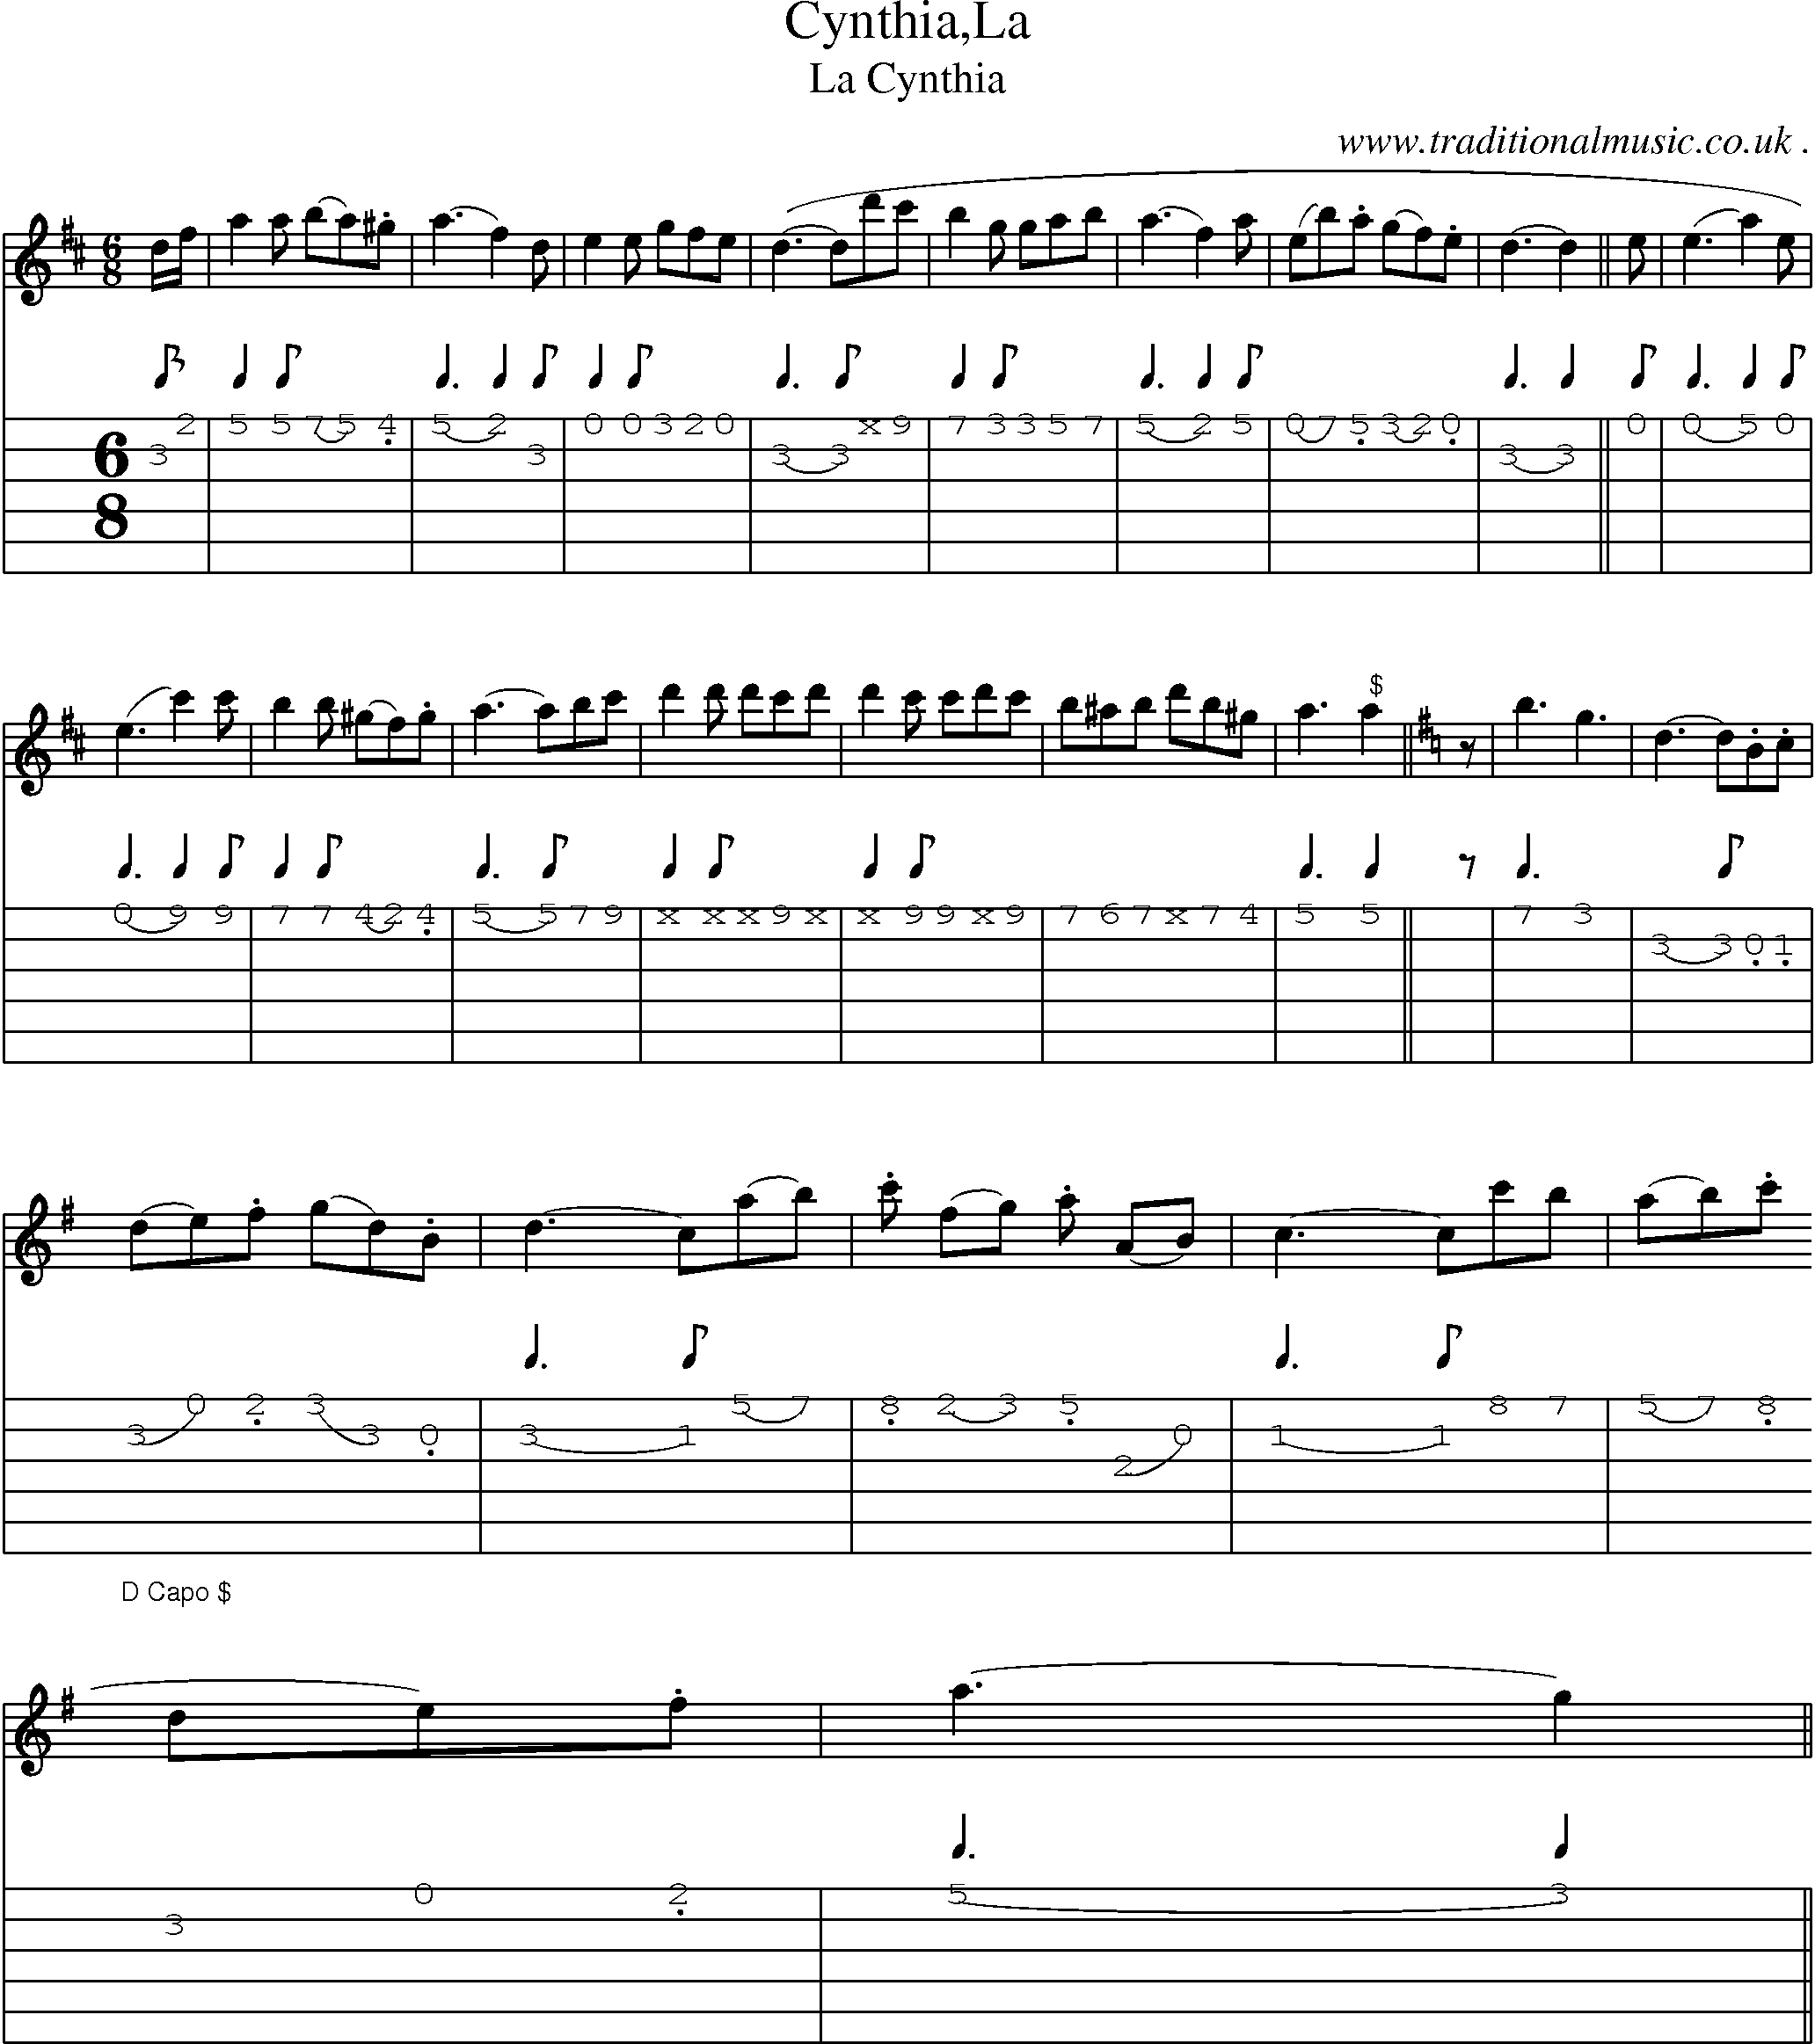 Sheet-Music and Guitar Tabs for Cynthiala